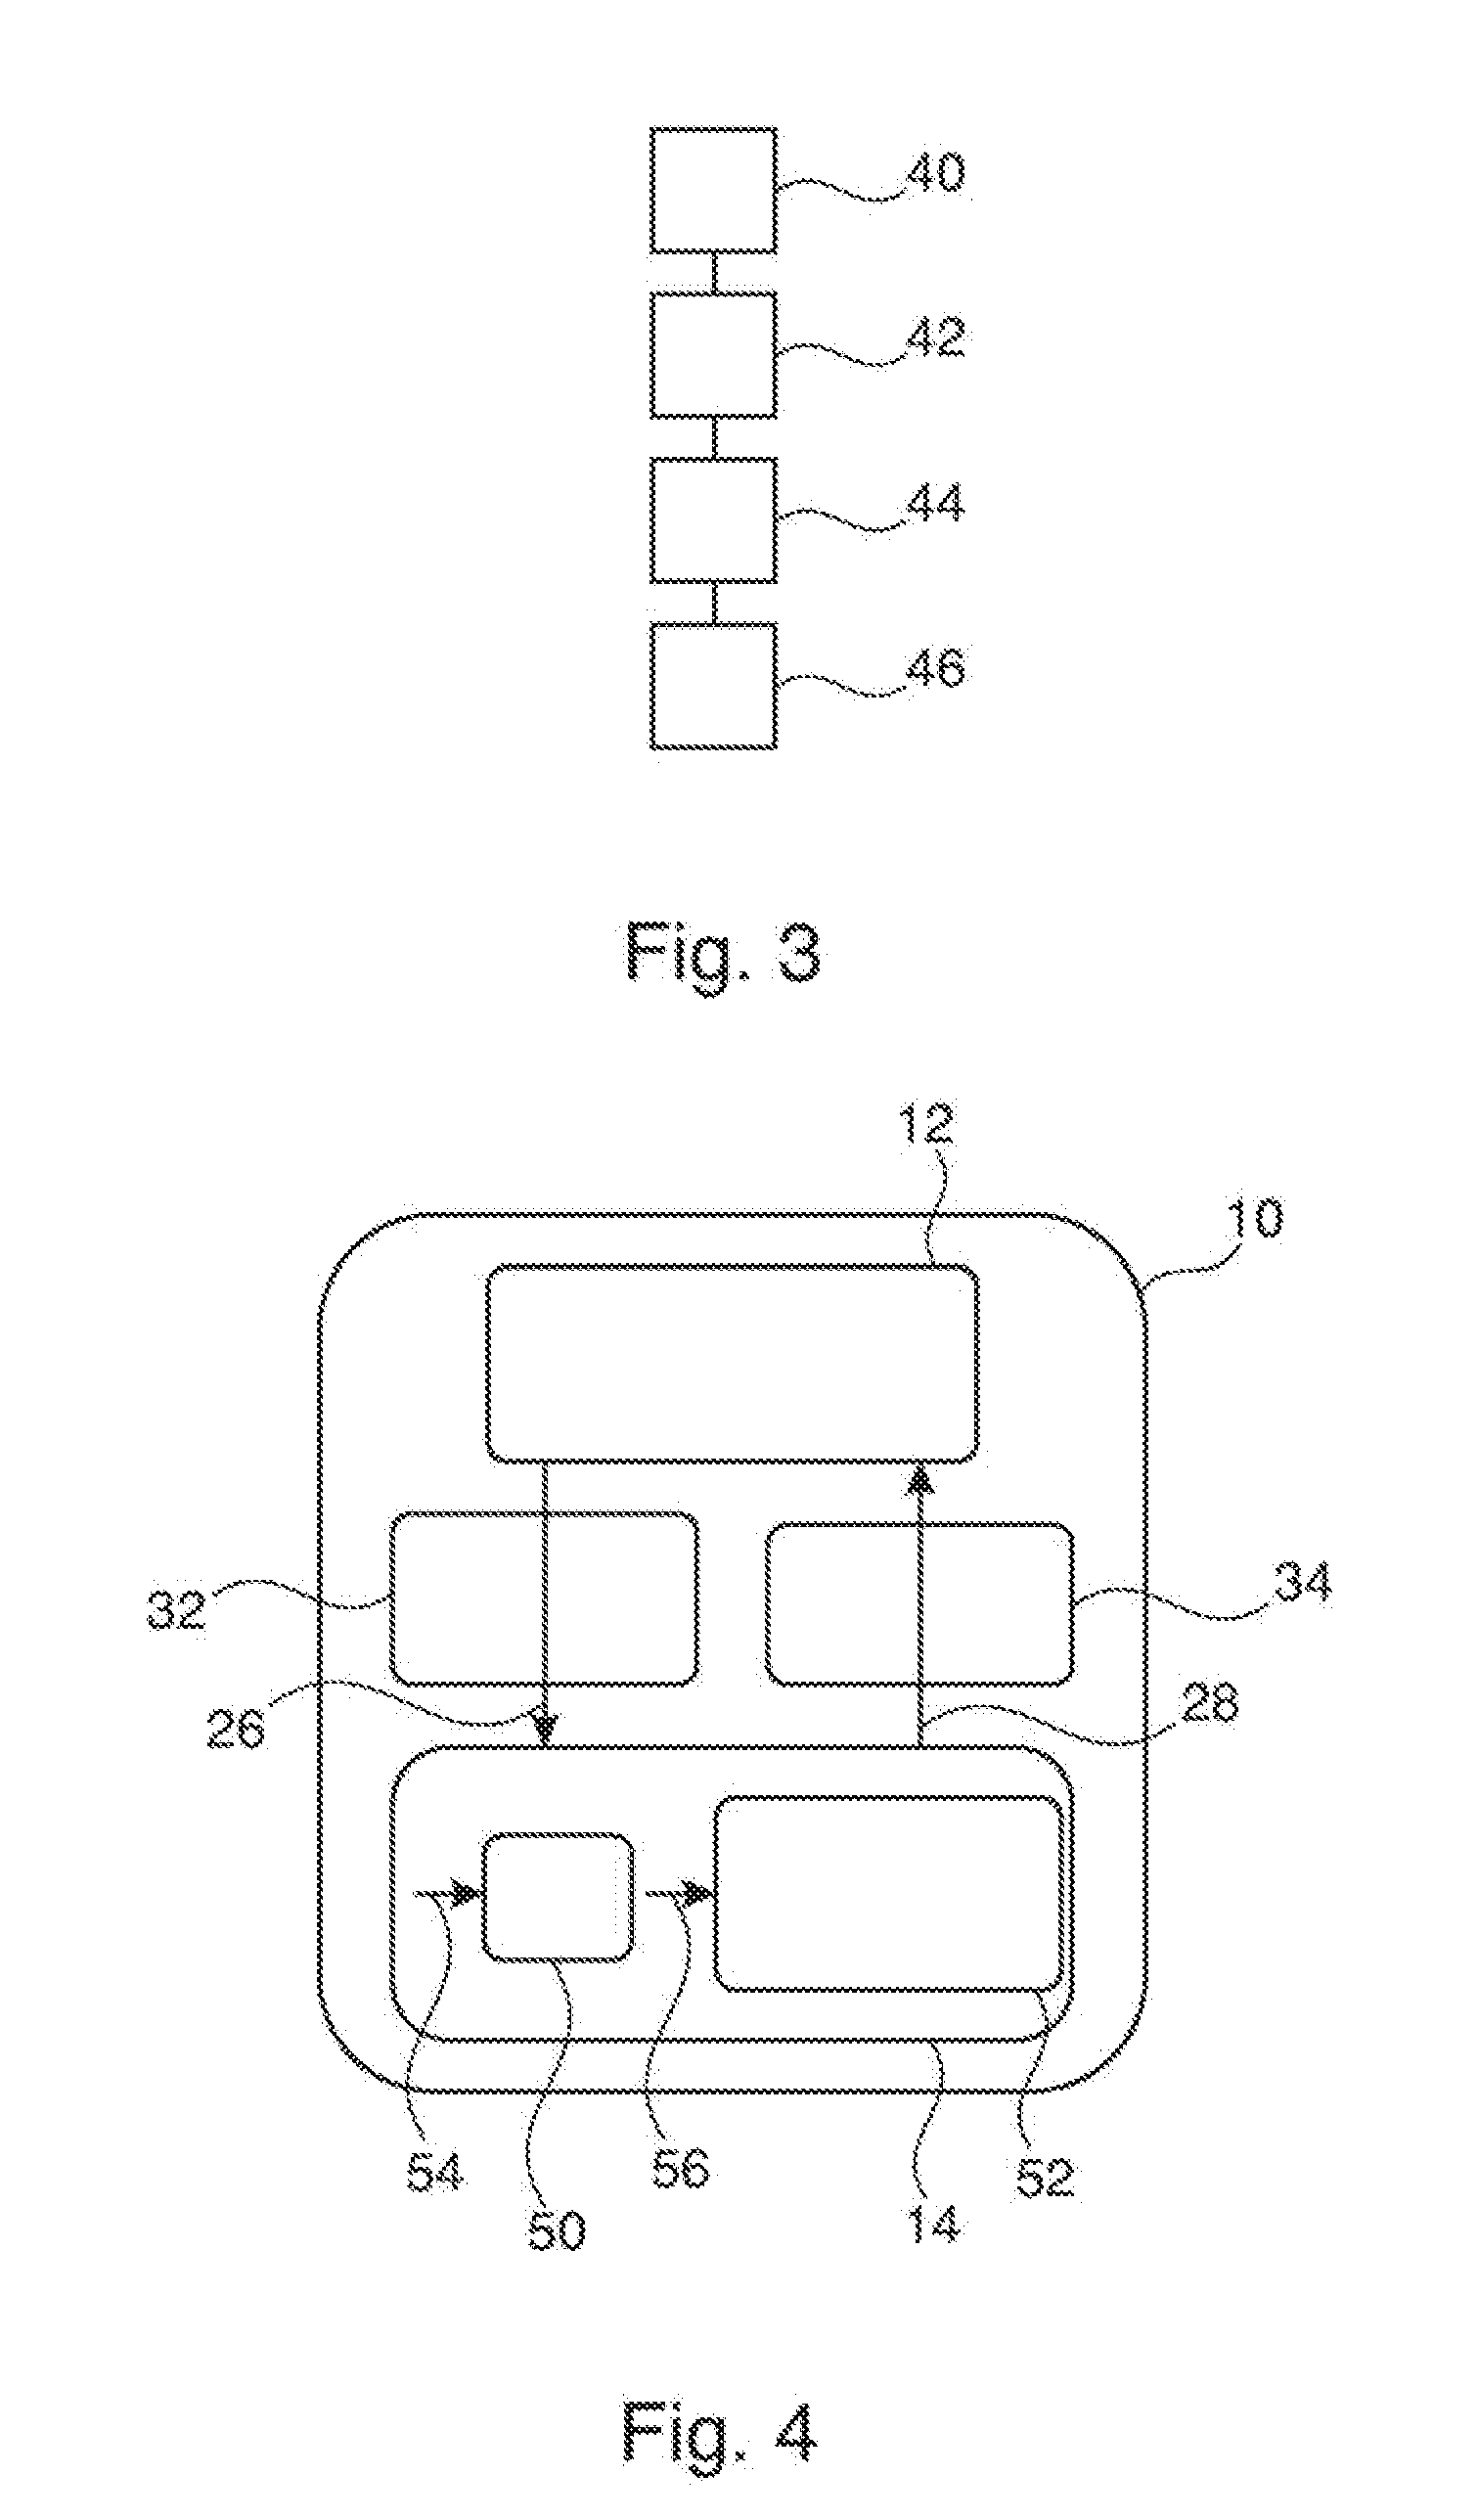 Networked control of a modular multi-level converter